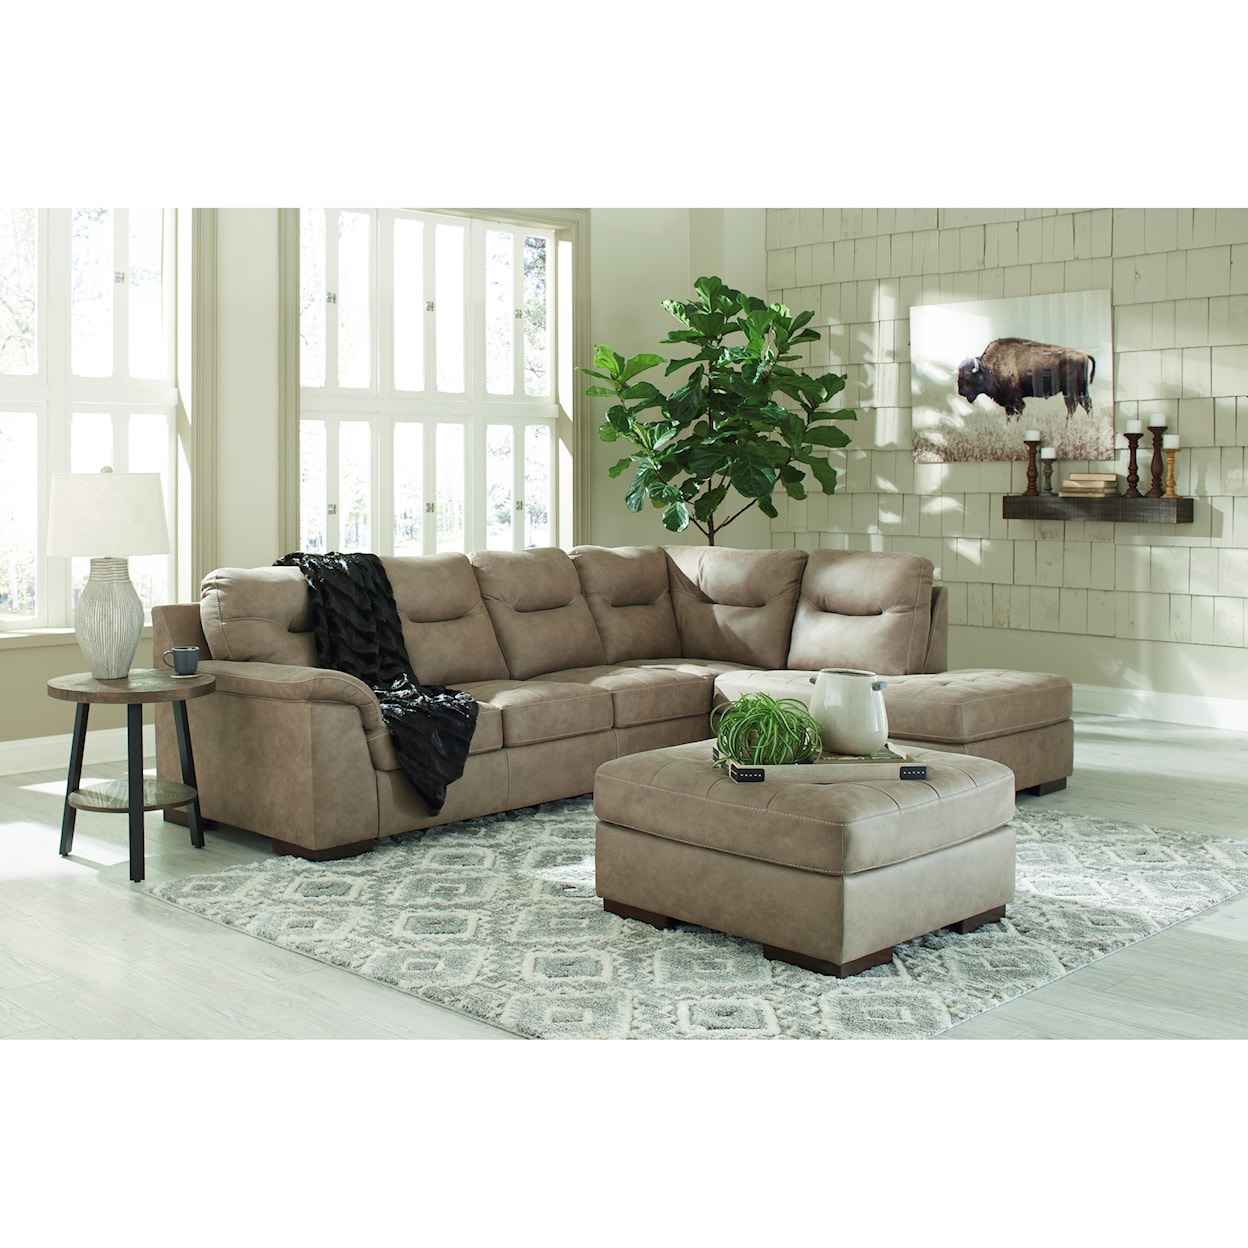 Signature Design by Ashley Furniture Maderla 2-Piece Sectional with Chaise